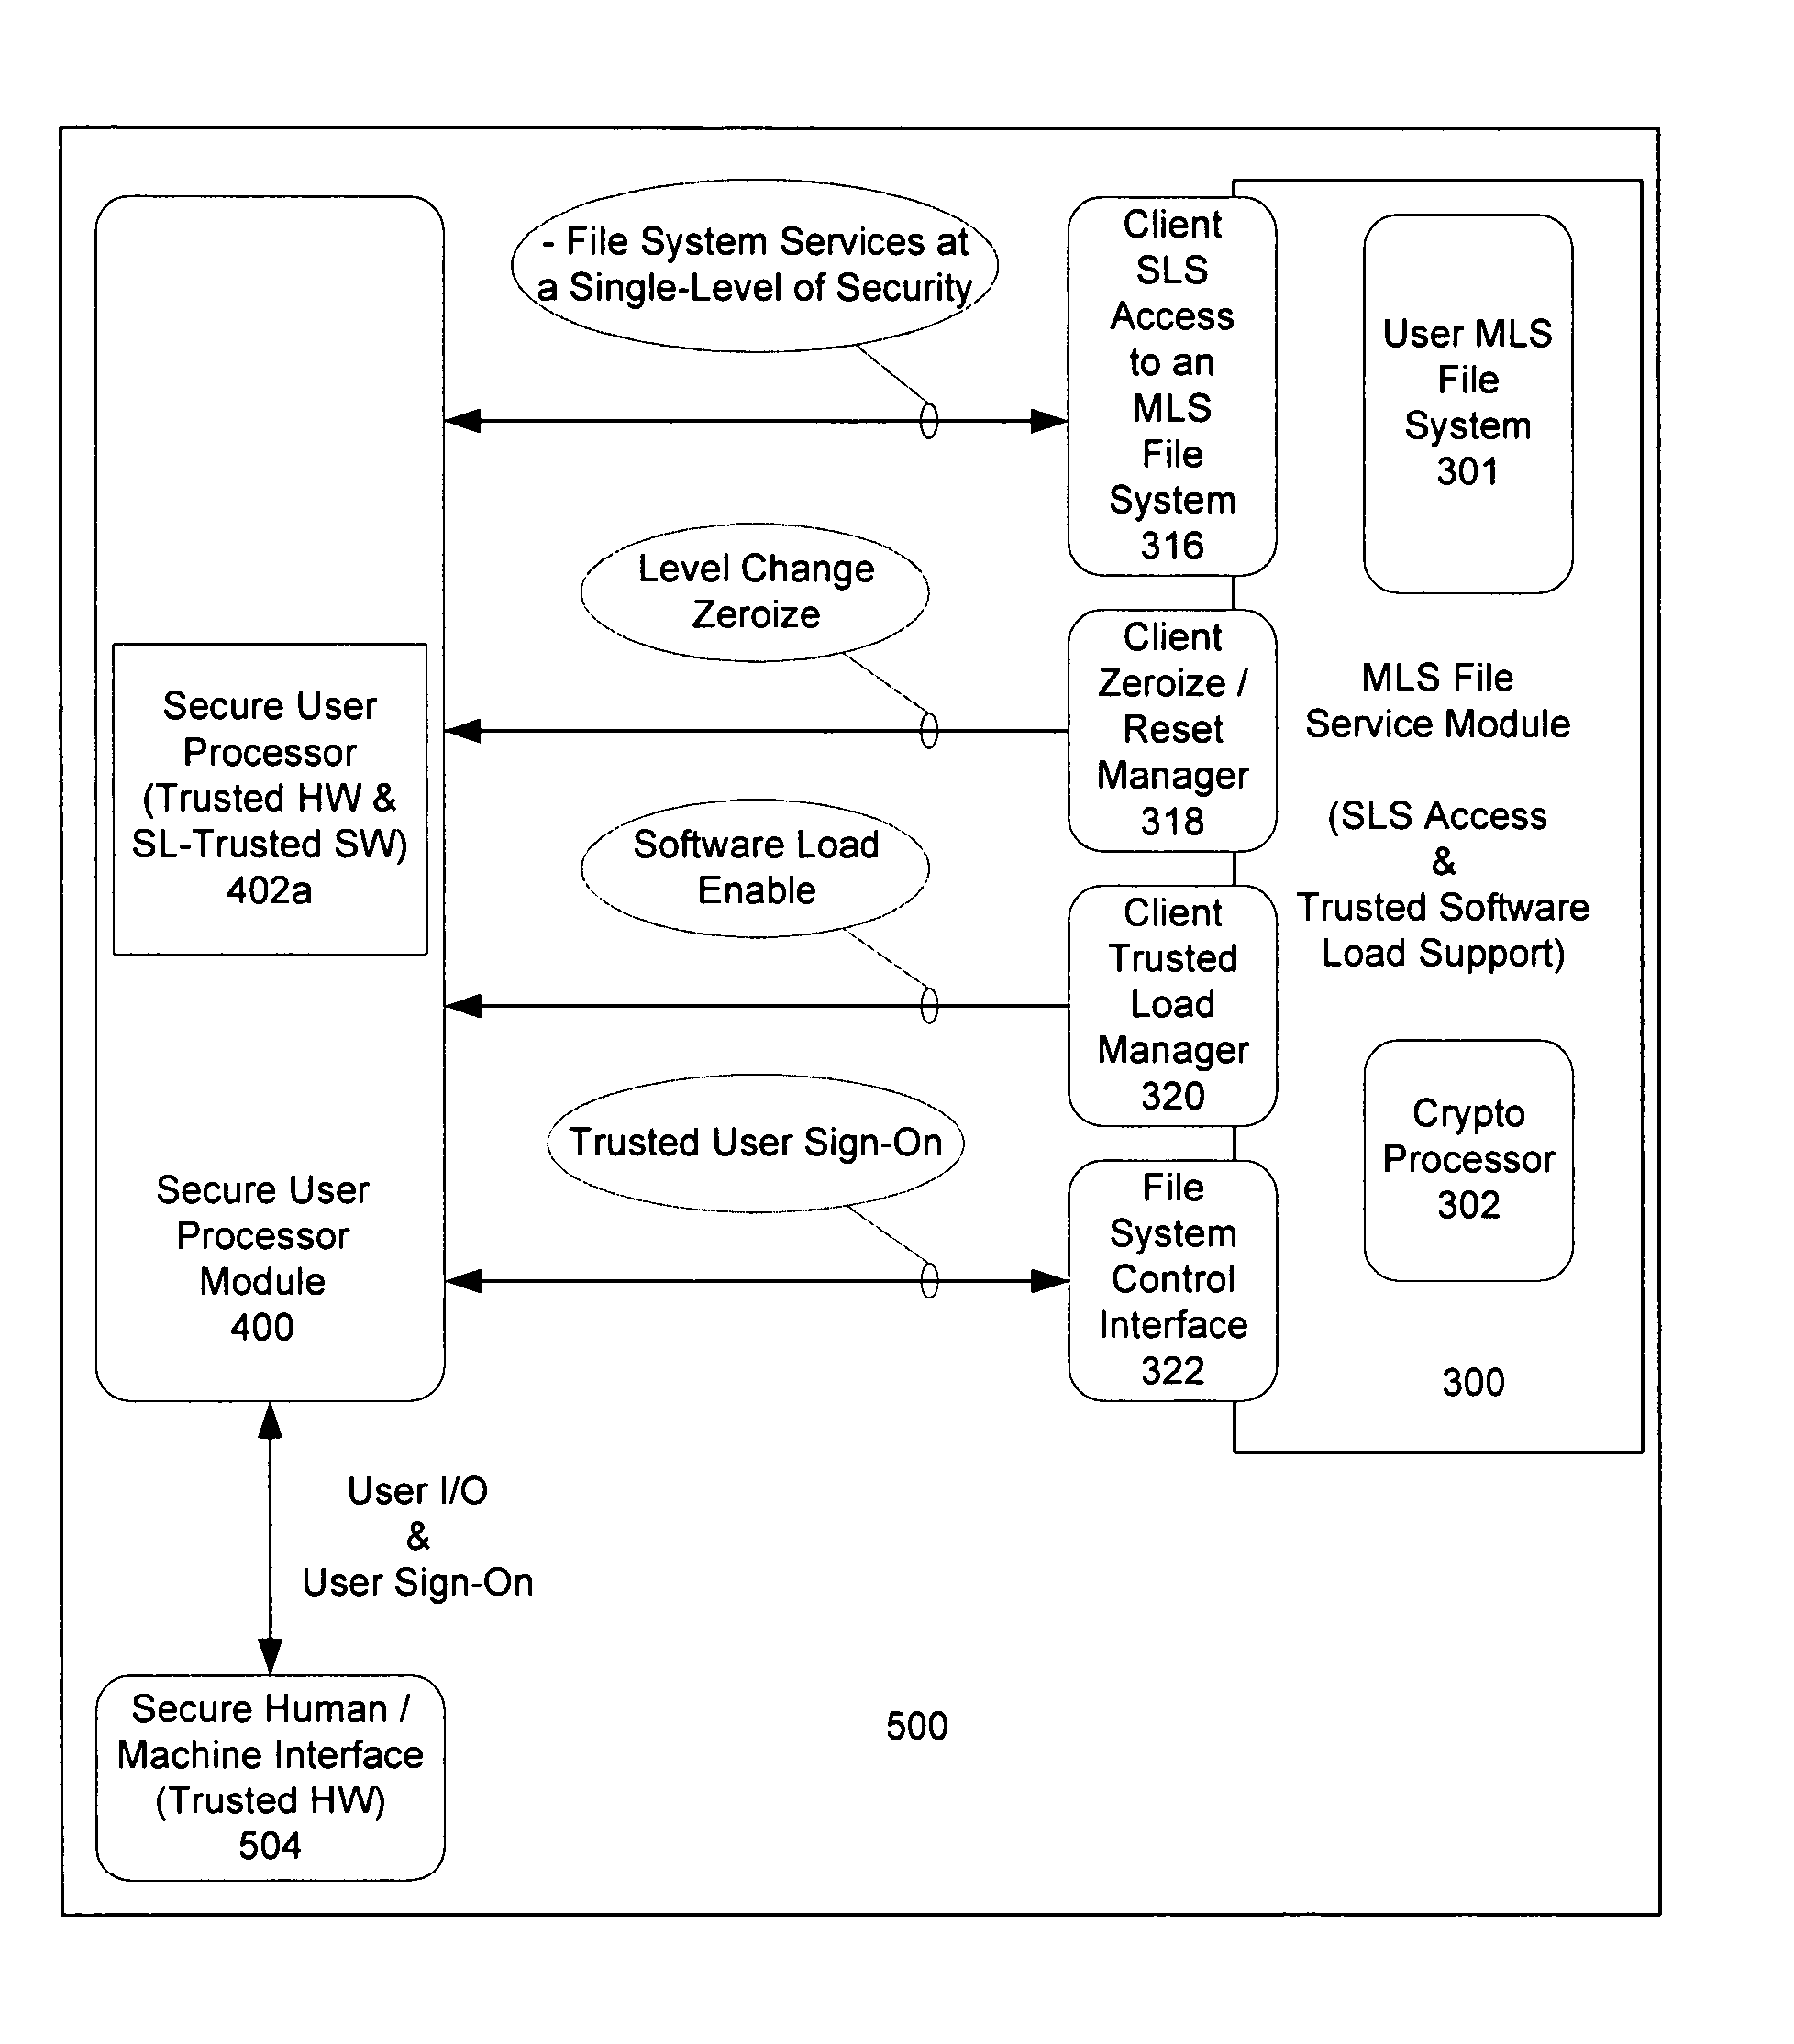 Computer architecture for an electronic device providing SLS access to MLS file system with trusted loading and protection of program execution memory